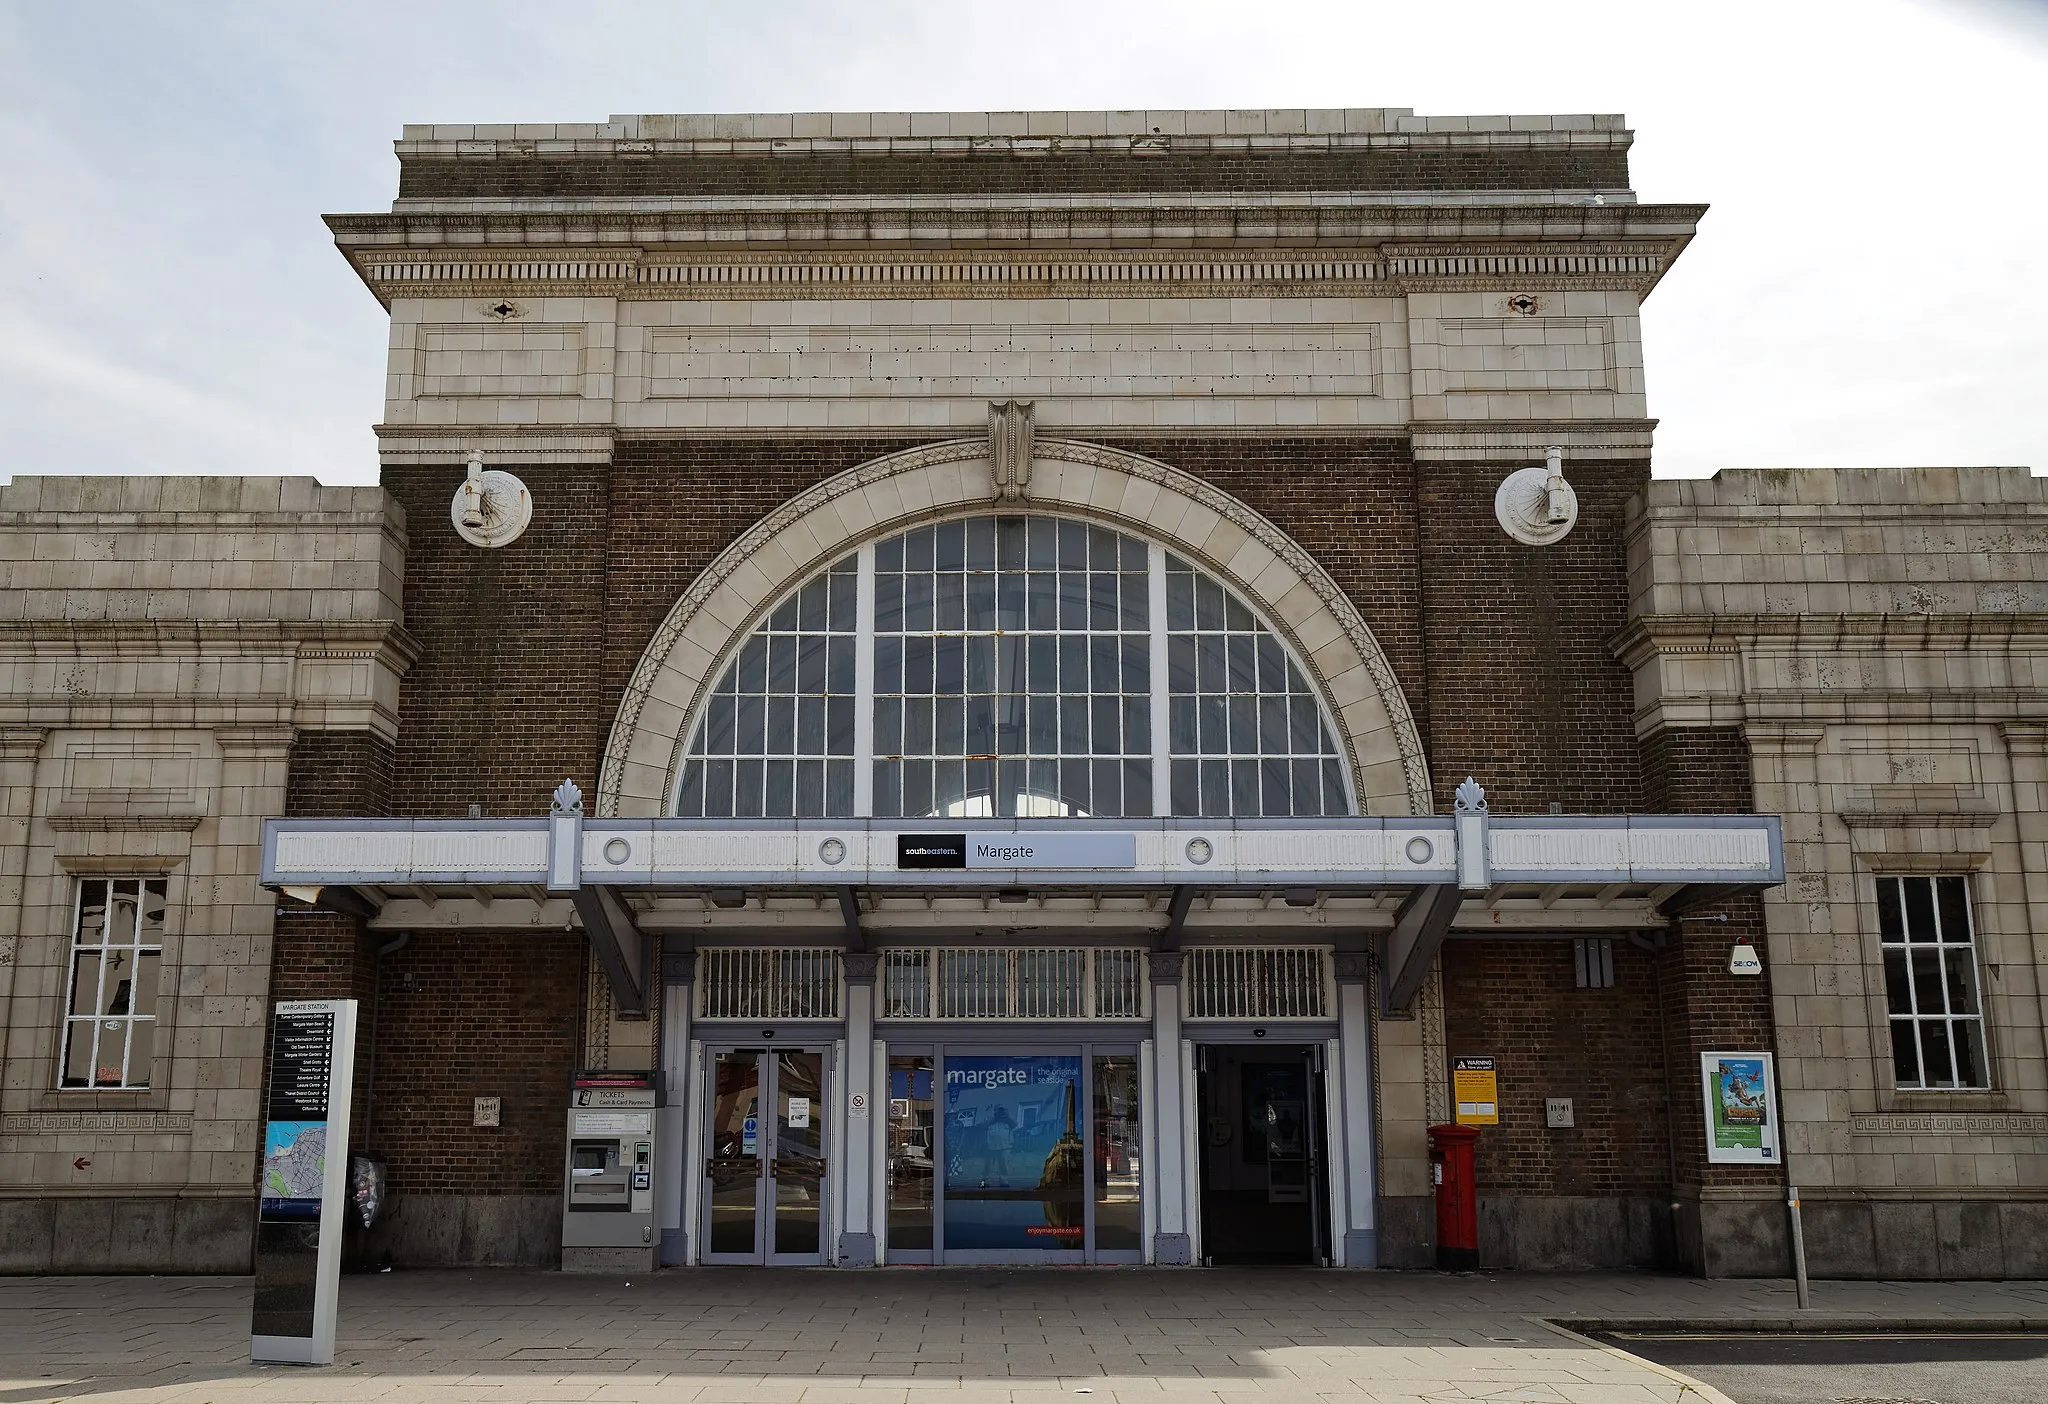 Photo showing: The entrance of Margate railway station, Margate, Kent, England. Camera: Canon EOS 6D with Canon EF 24-105mm F4L IS USM lens. Software: large RAW file lens-corrected, optimized and downsized with DxO OpticsPro 10 Elite, Viewpoint 2, and Adobe Photoshop CS2.